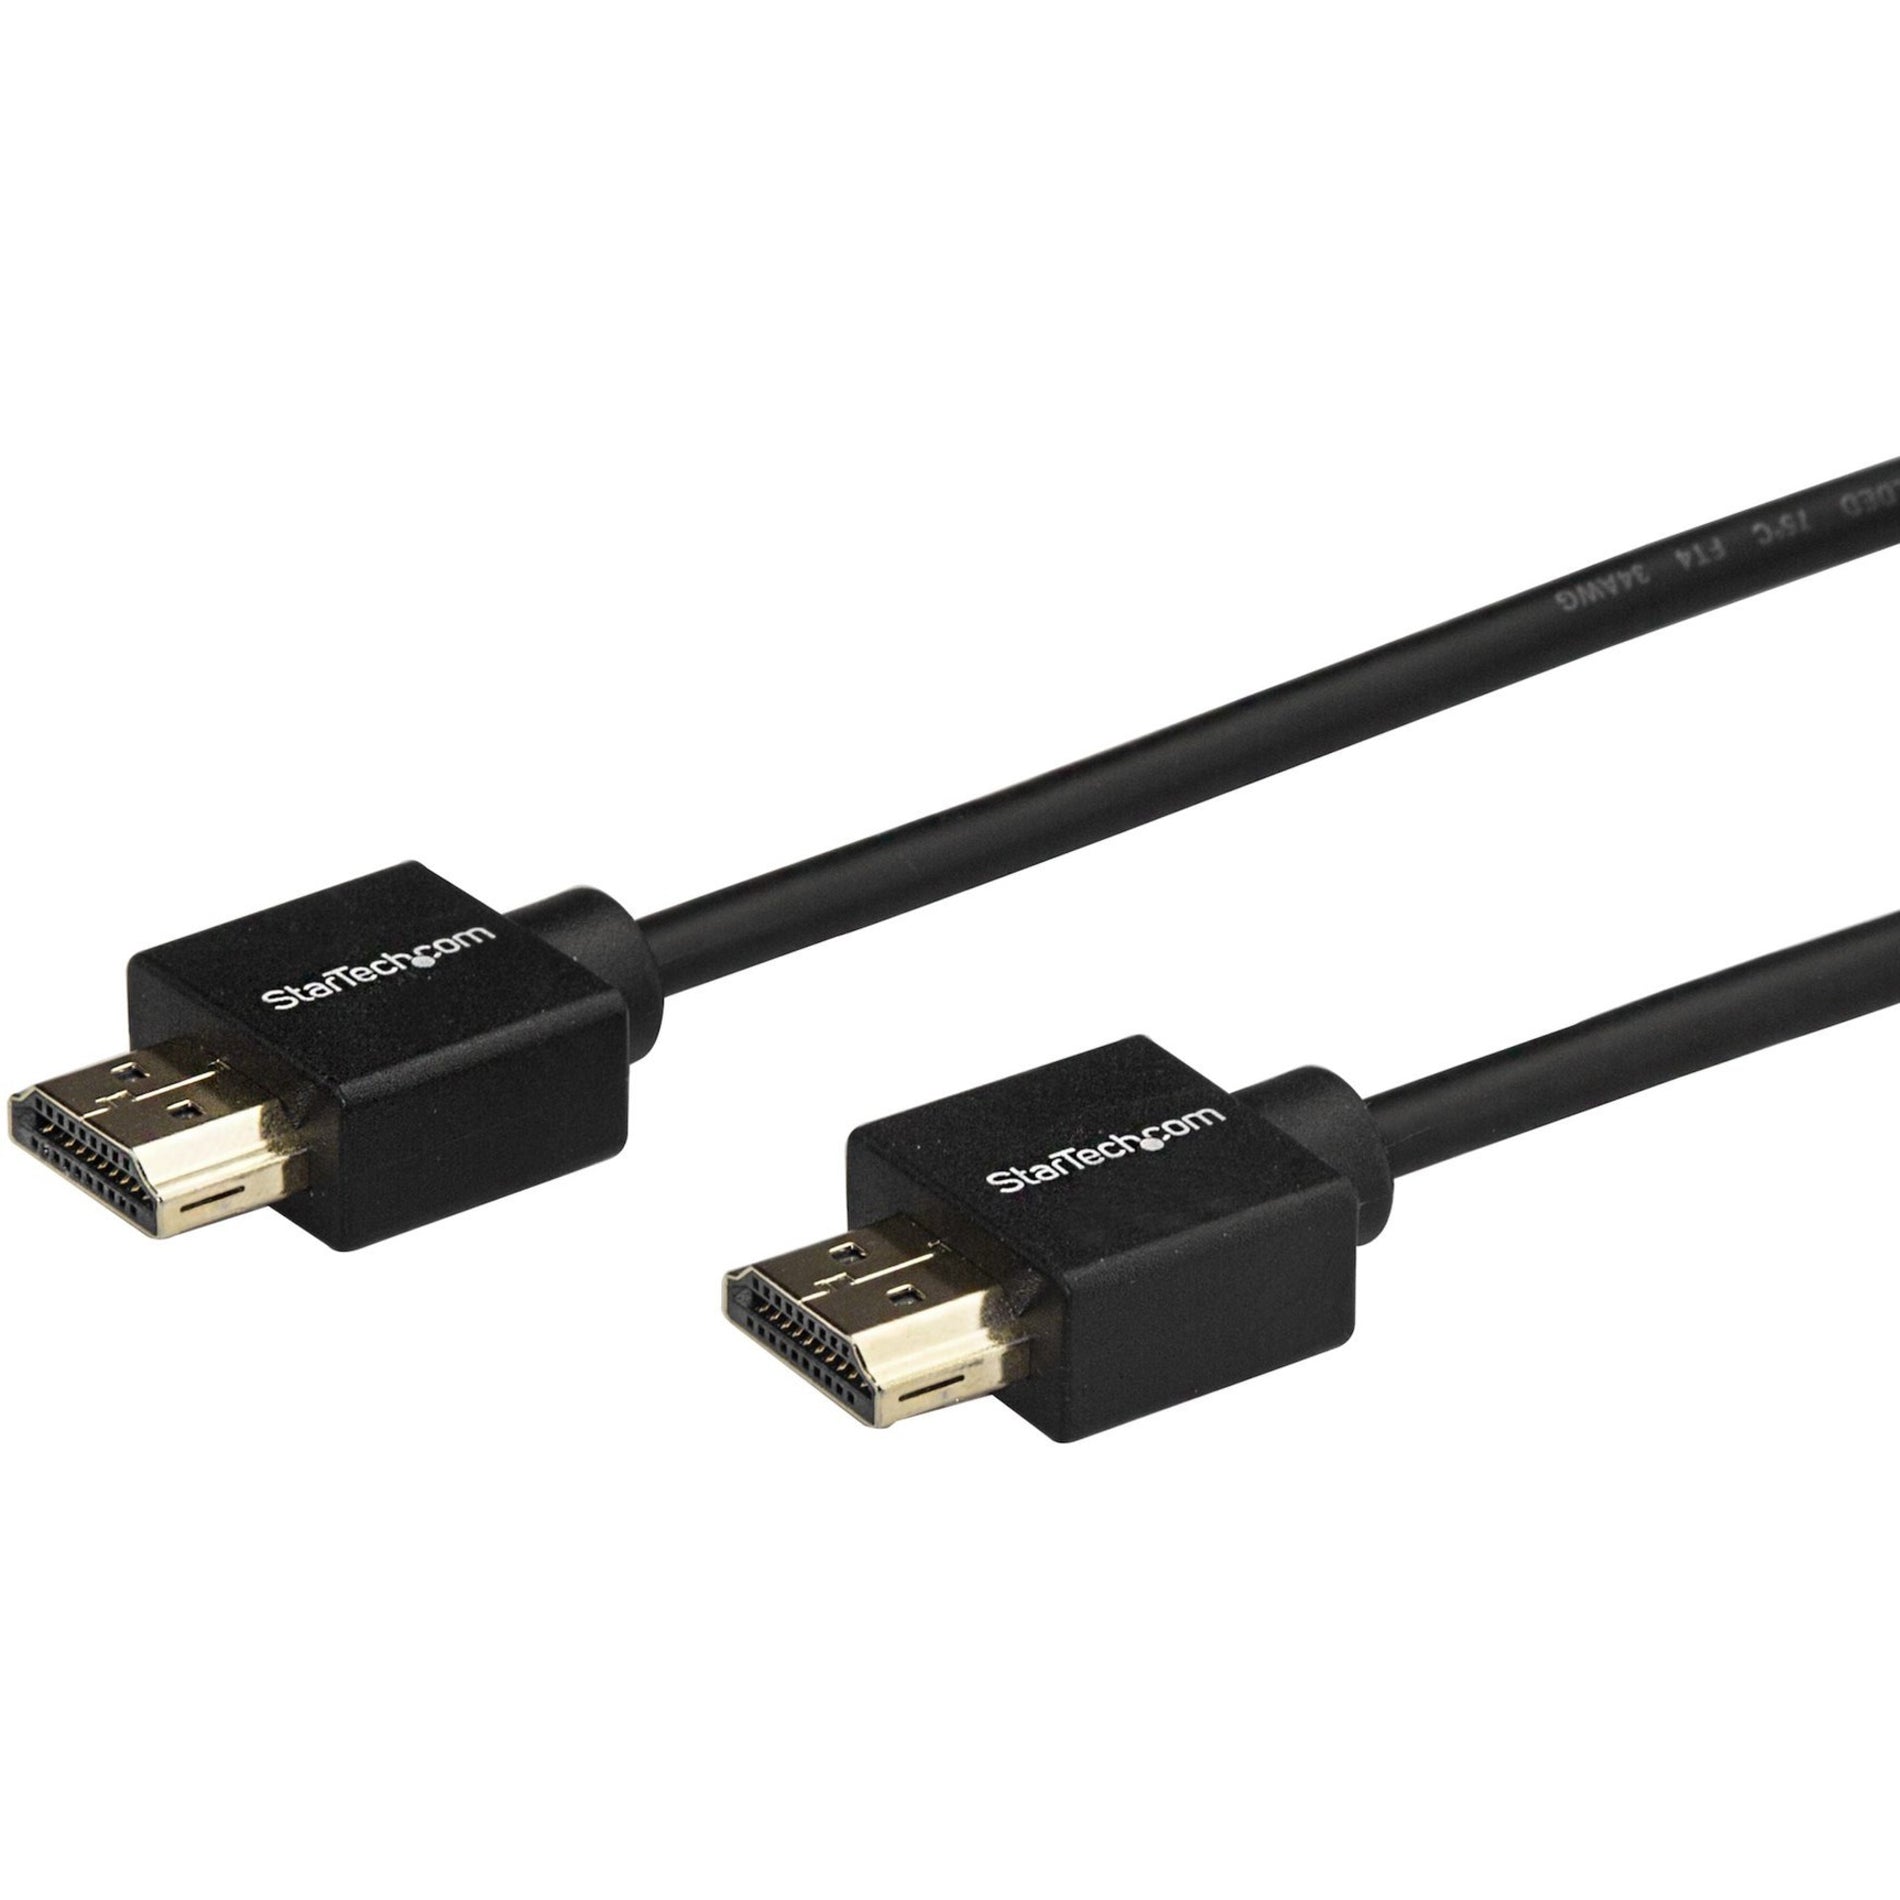 StarTech.com HDMM2MLP 6' 2m Certified HDMI 2.0 Cable w/ Gripping Connectors 4K 60Hz, Premium Video Cable